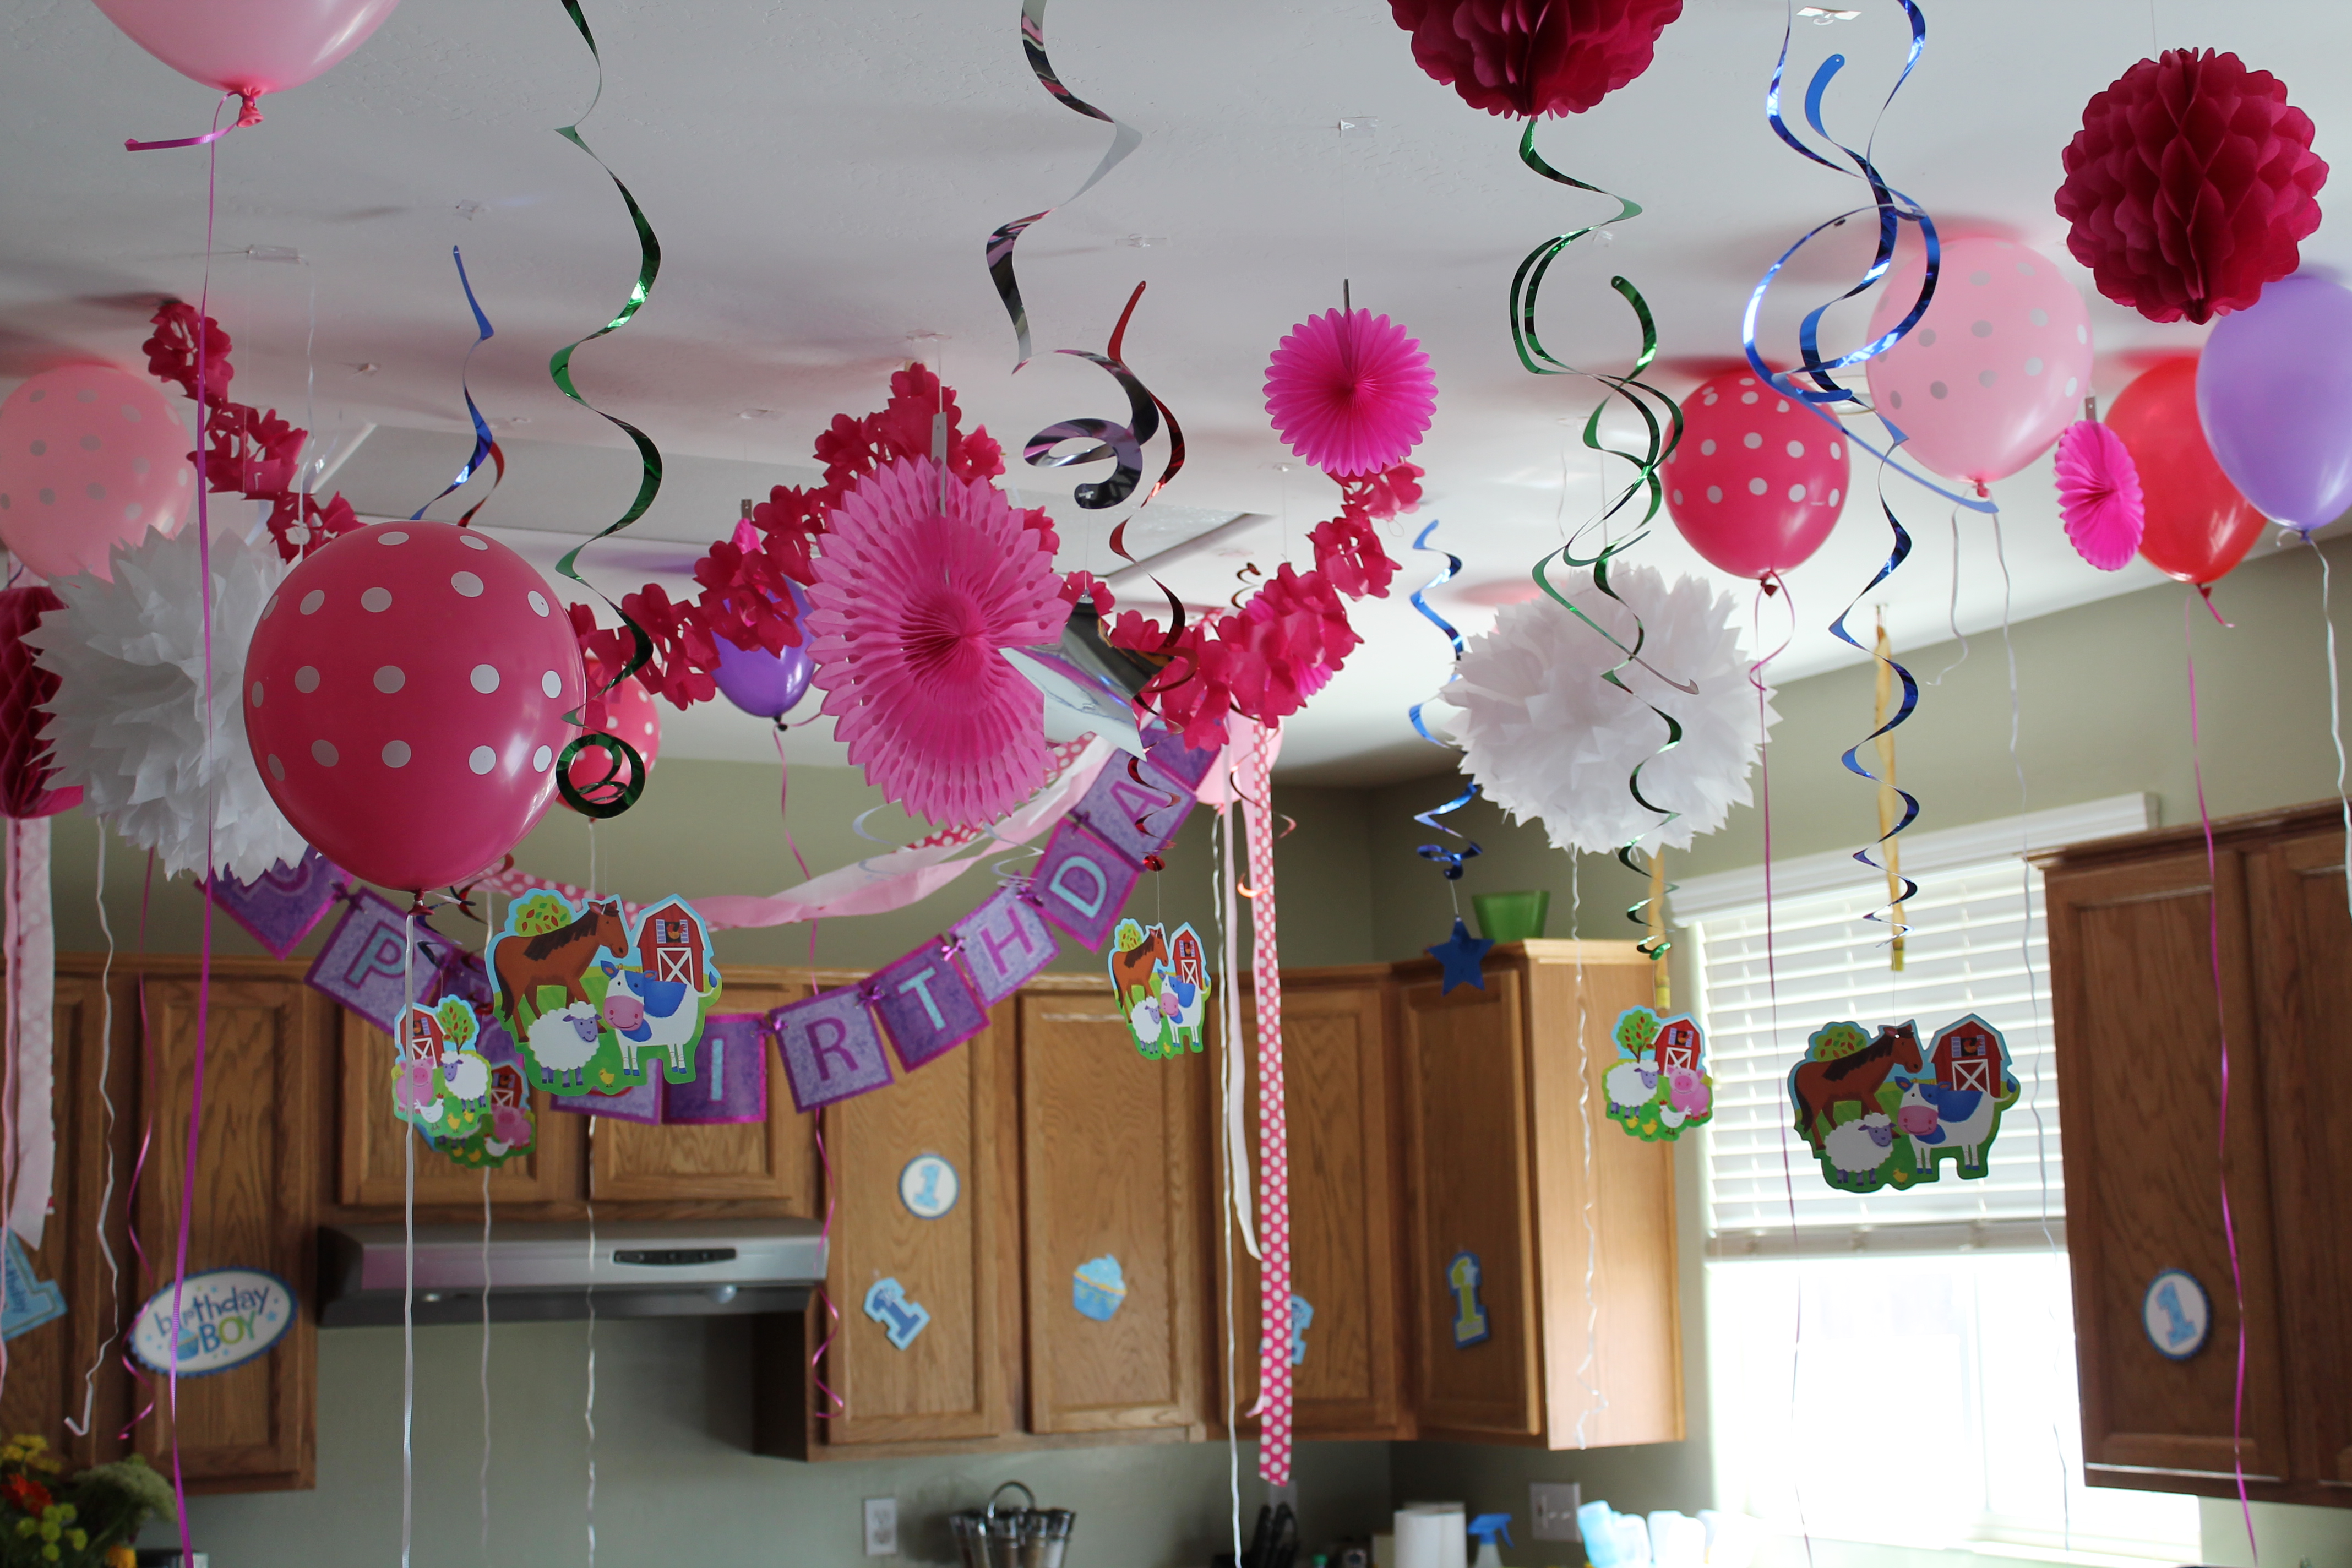 The house decorations for the babies’ first birthday party